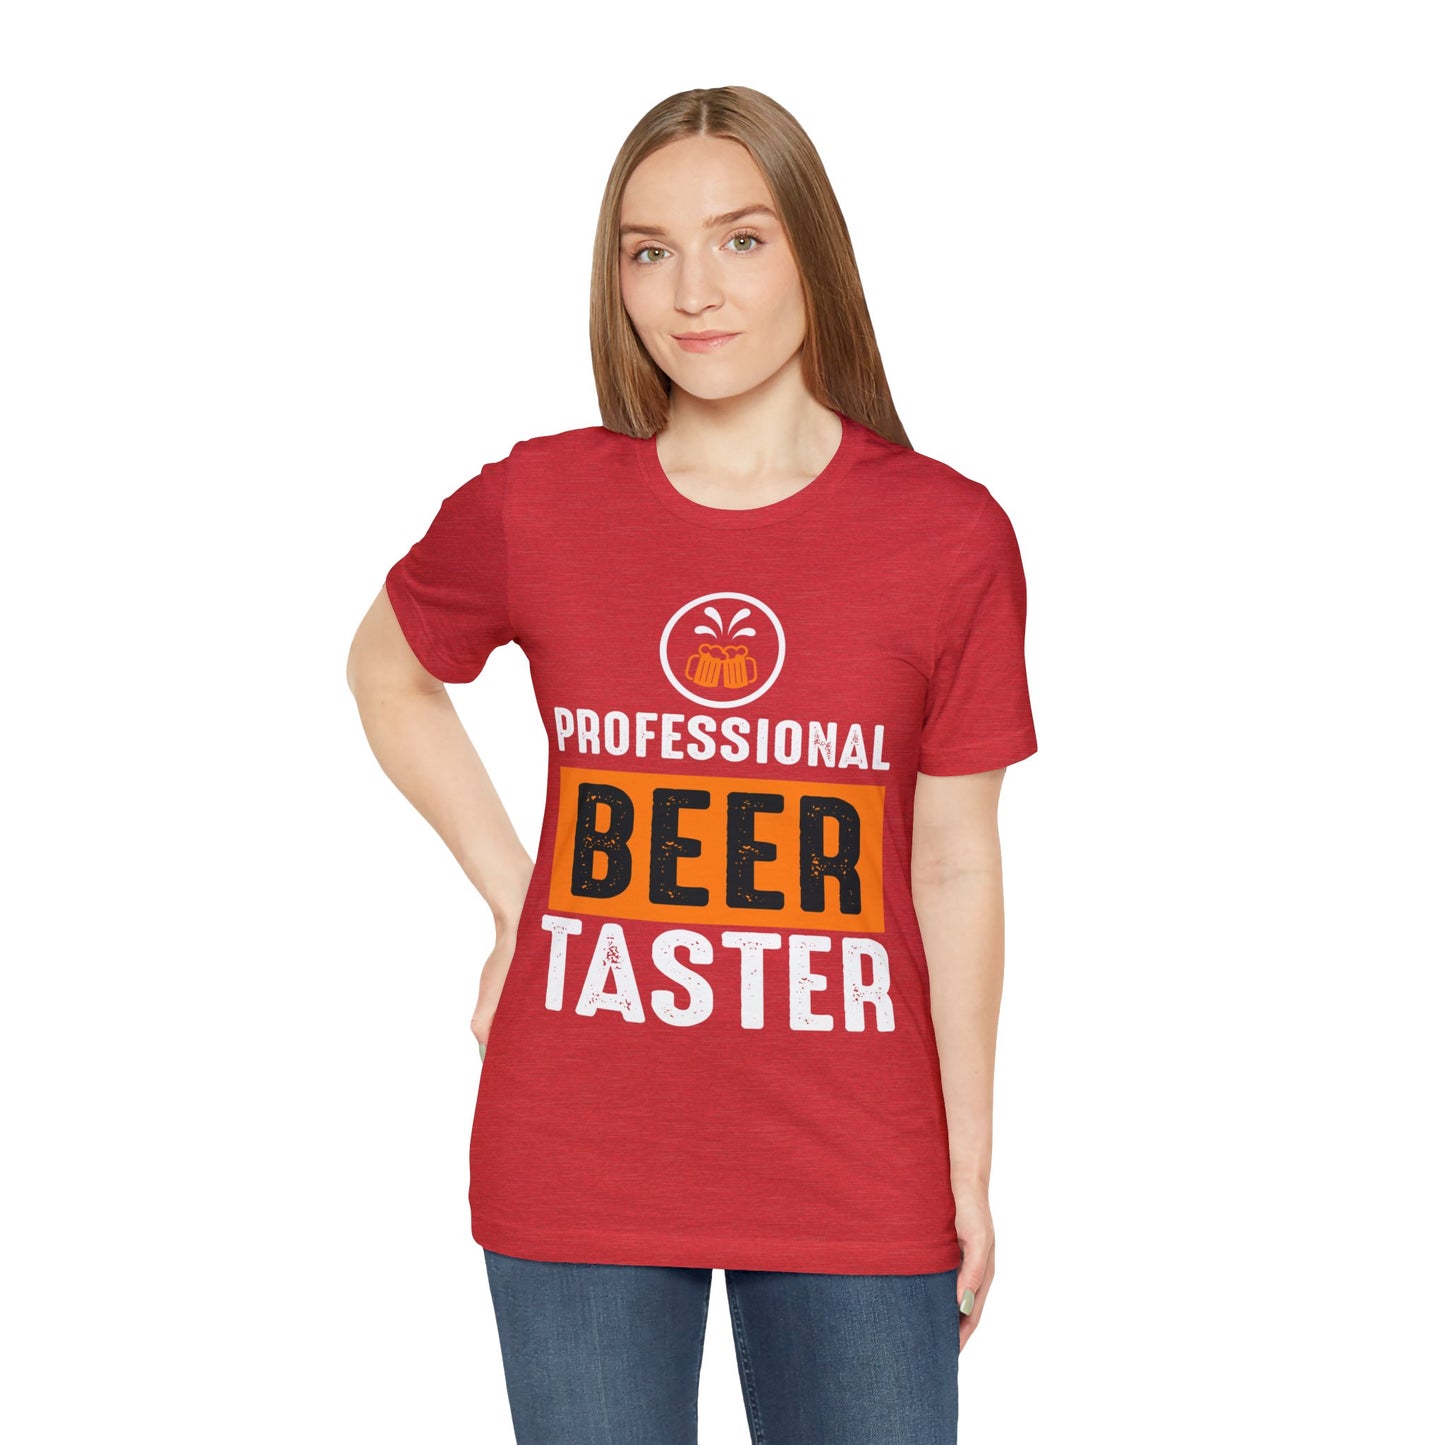 Professional Beer Taster Tee for Brew Enthusiasts